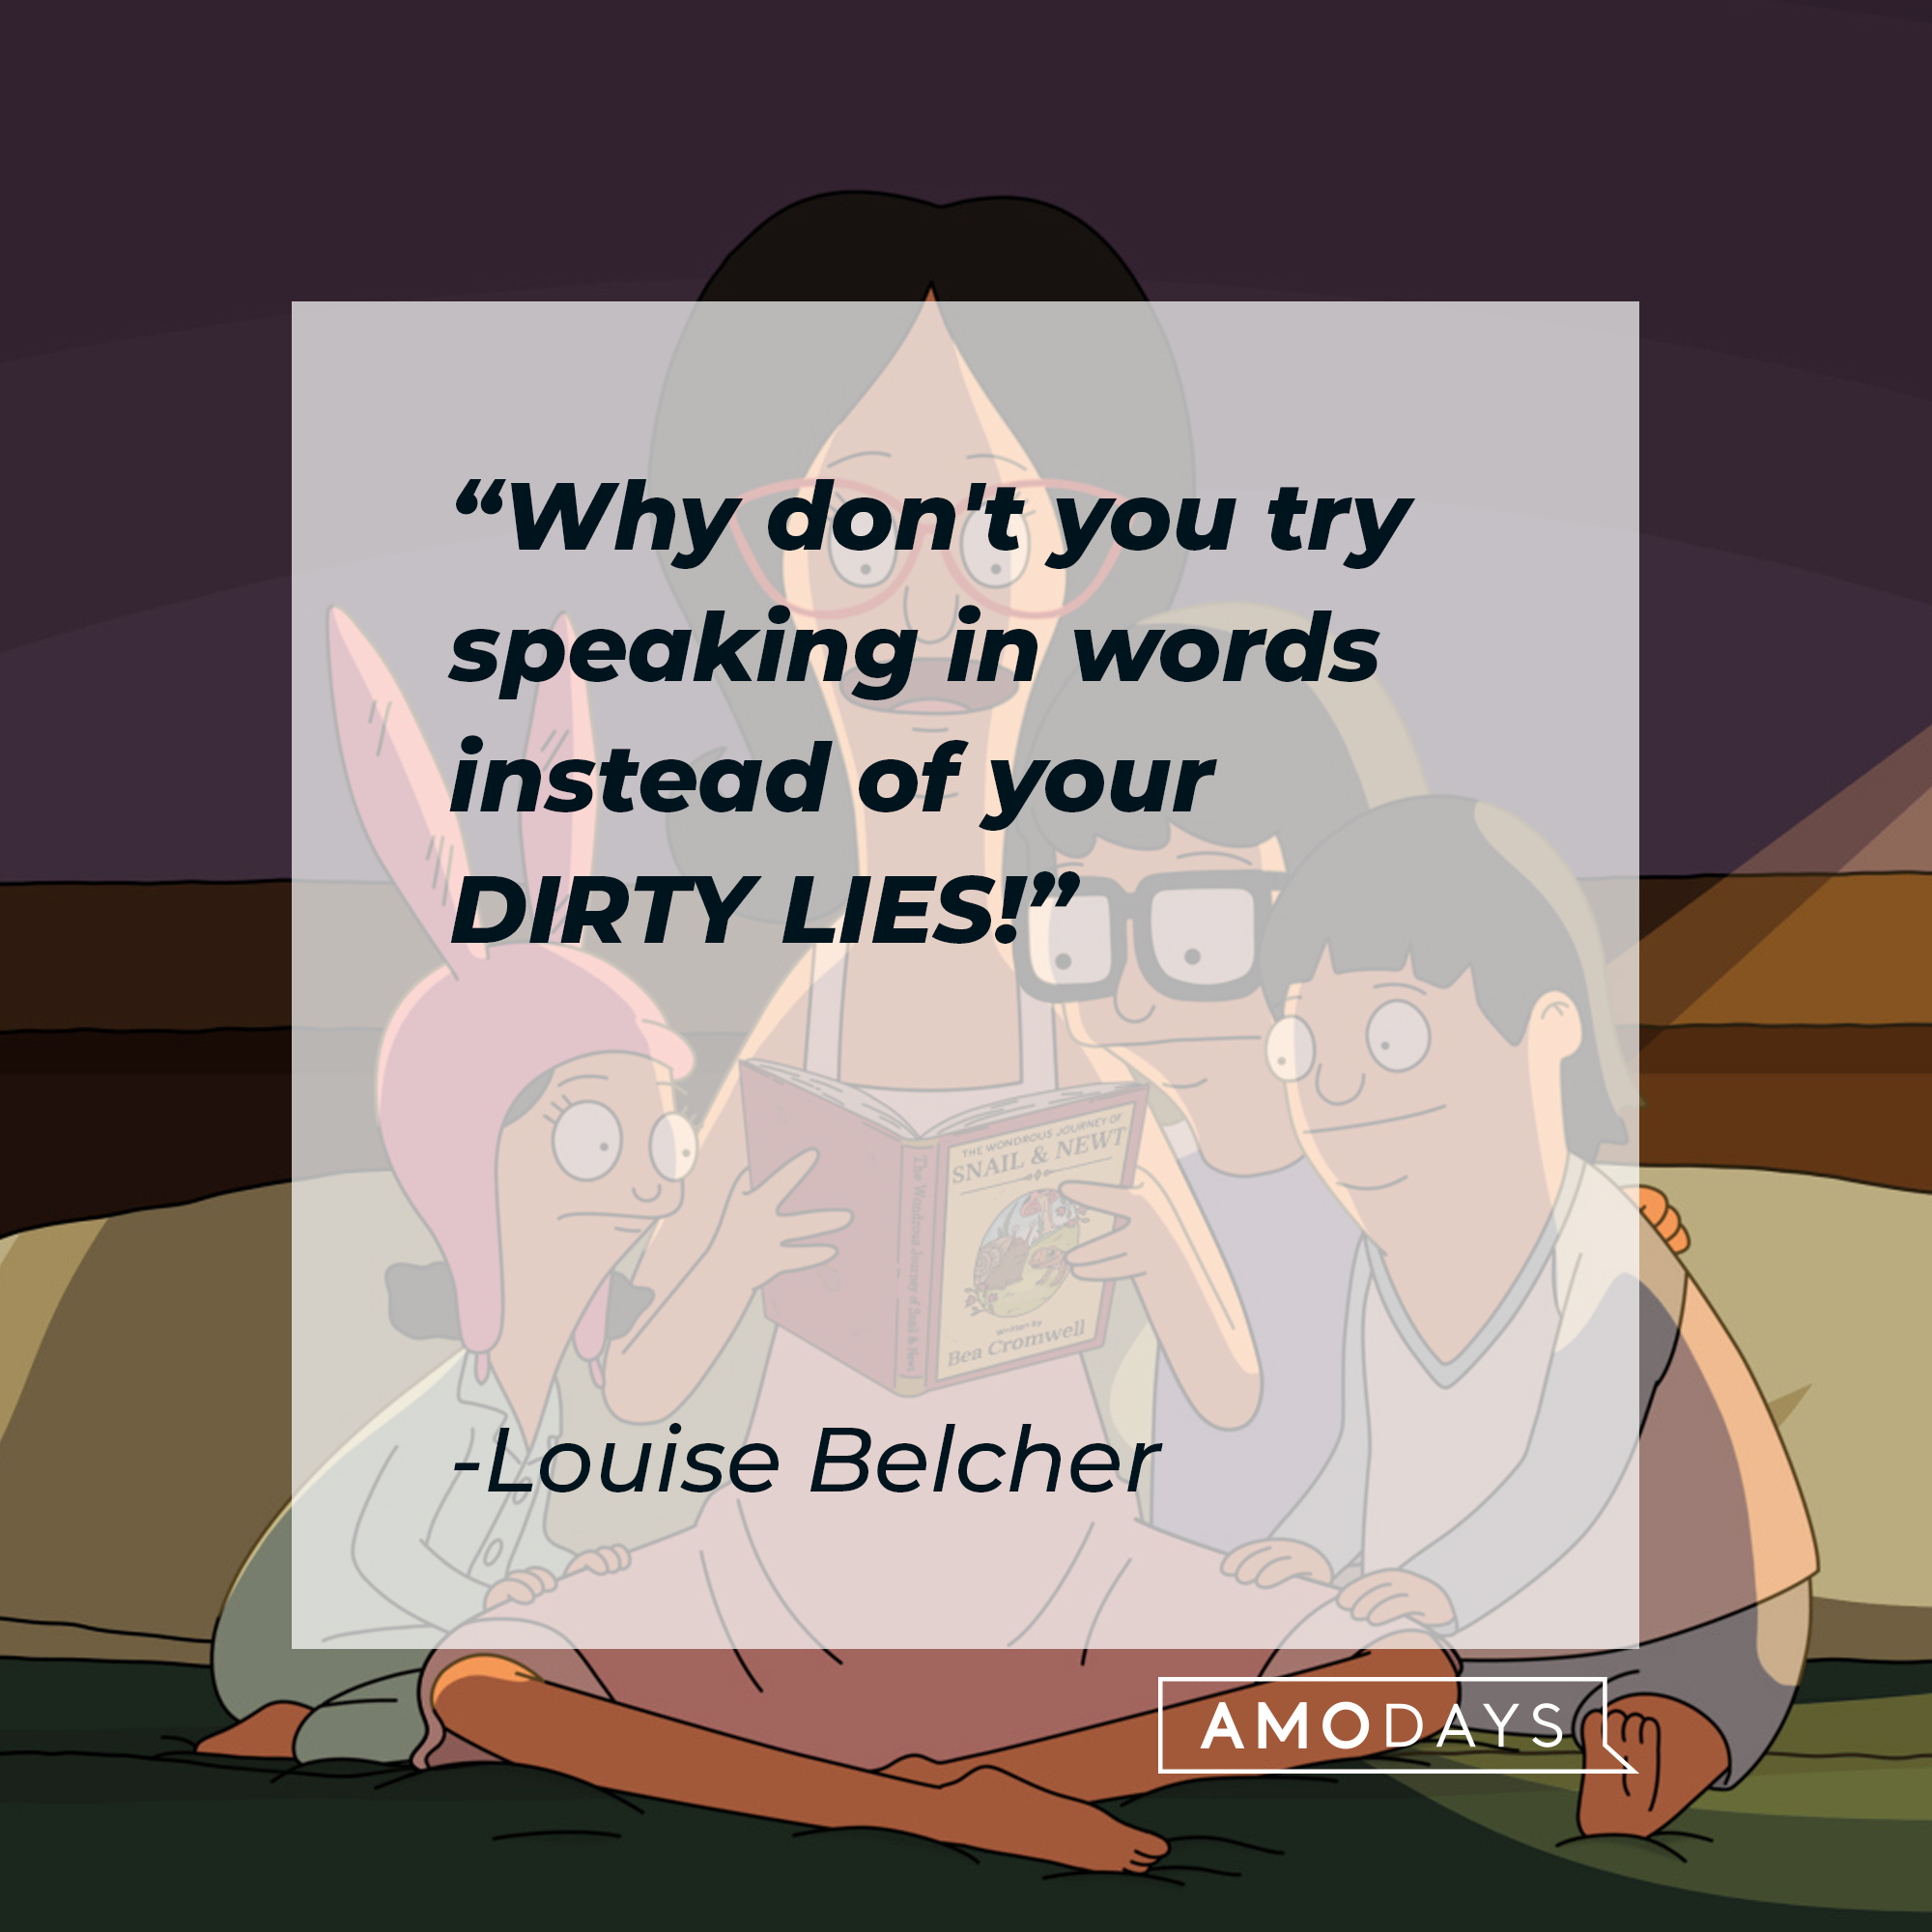 Louise Belcher's quote: "Why don't you try speaking in words instead of your DIRTY LIES!" | Source: facebook.com/BobsBurgers